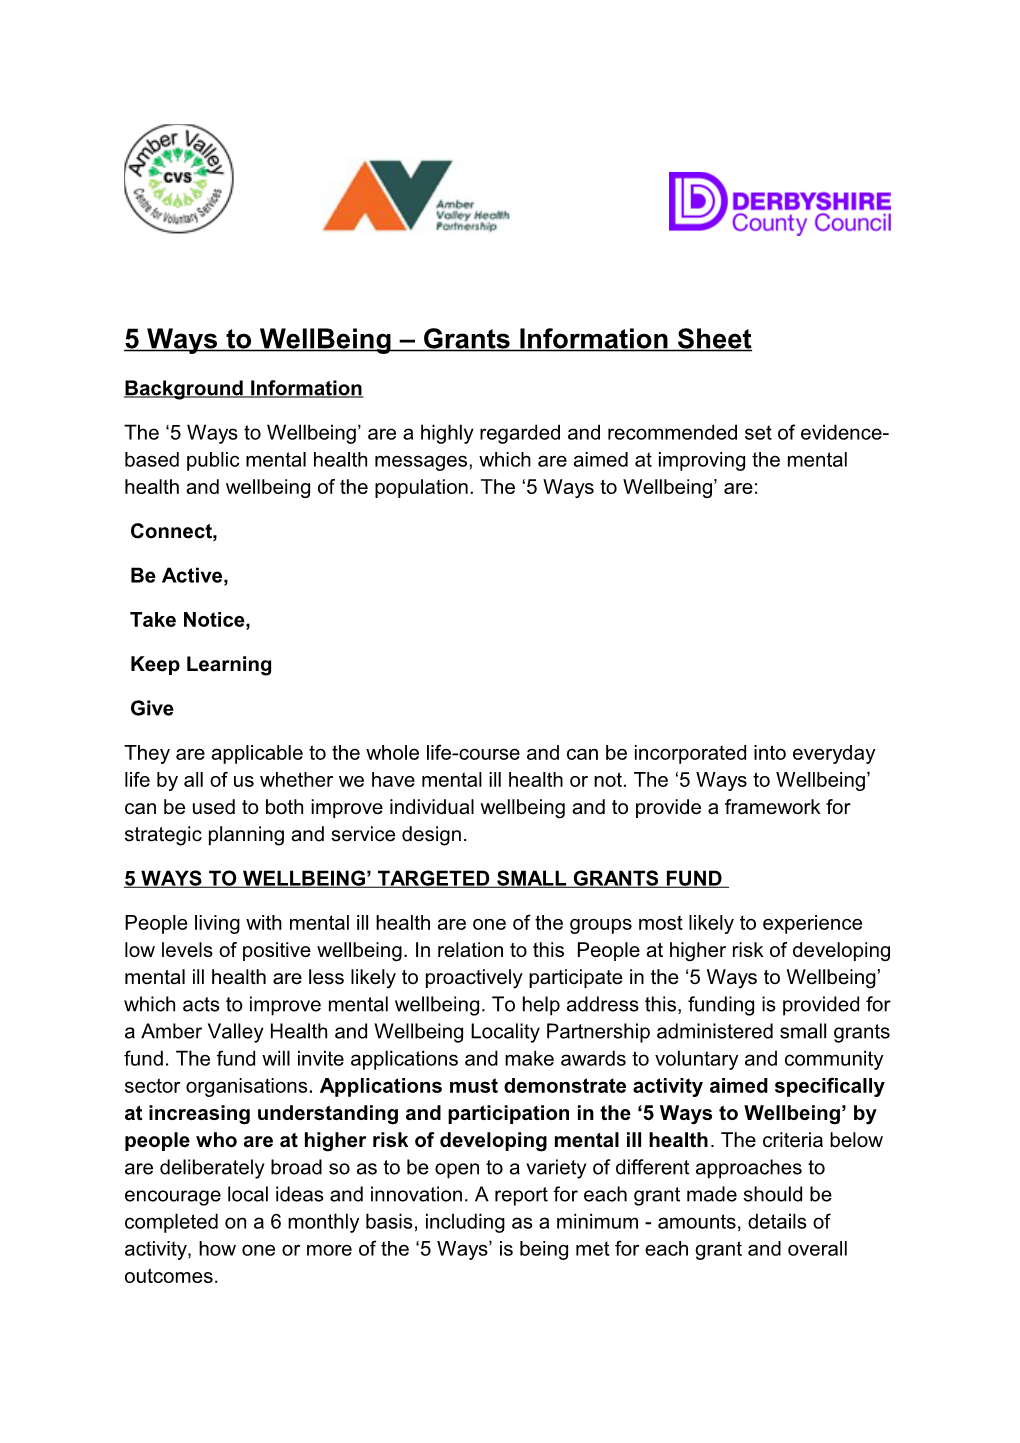 5 Ways to Wellbeing Grants Information Sheet